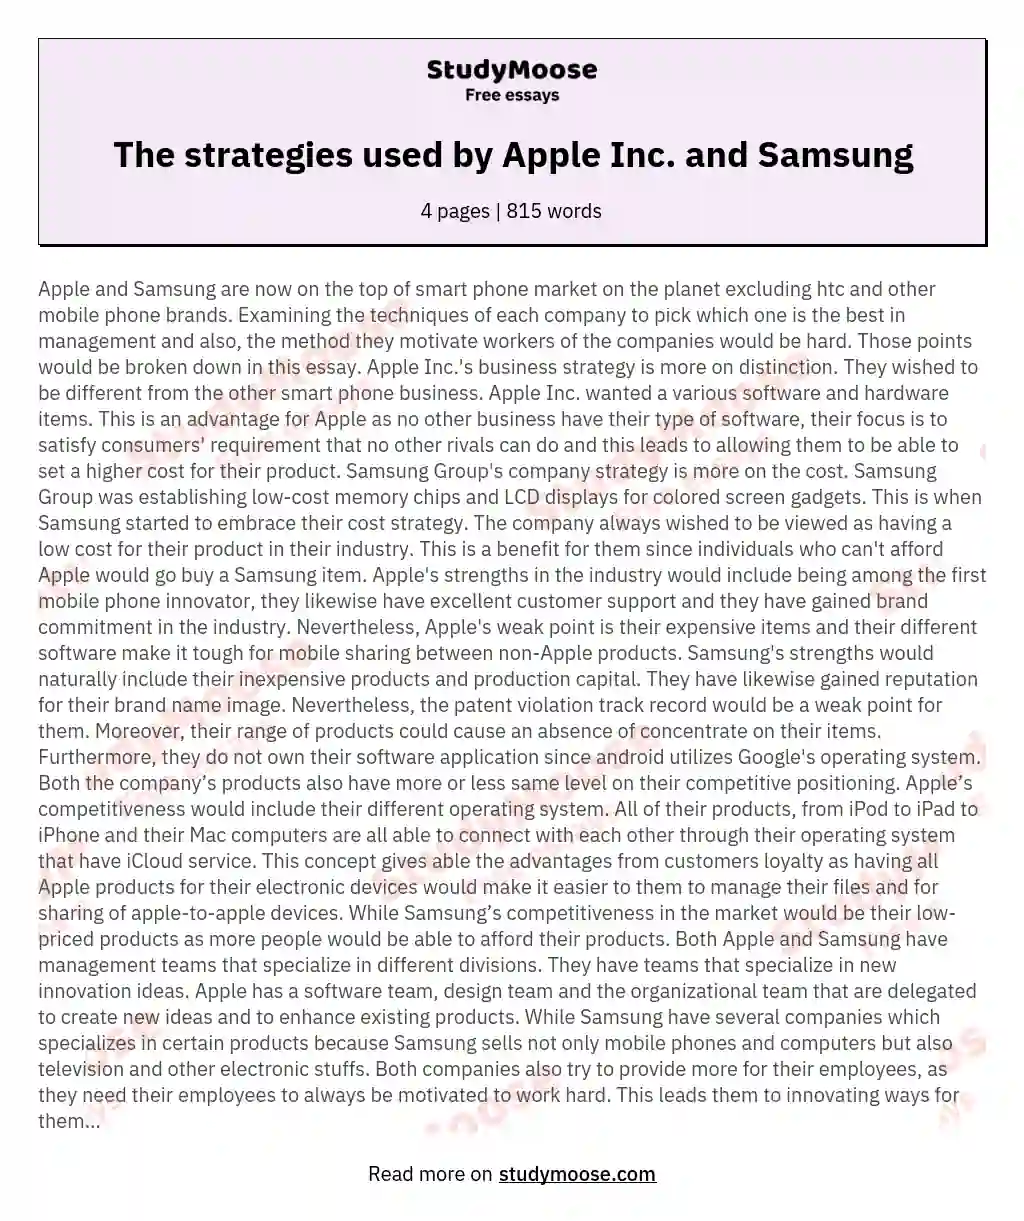 The strategies used by Apple Inc. and Samsung